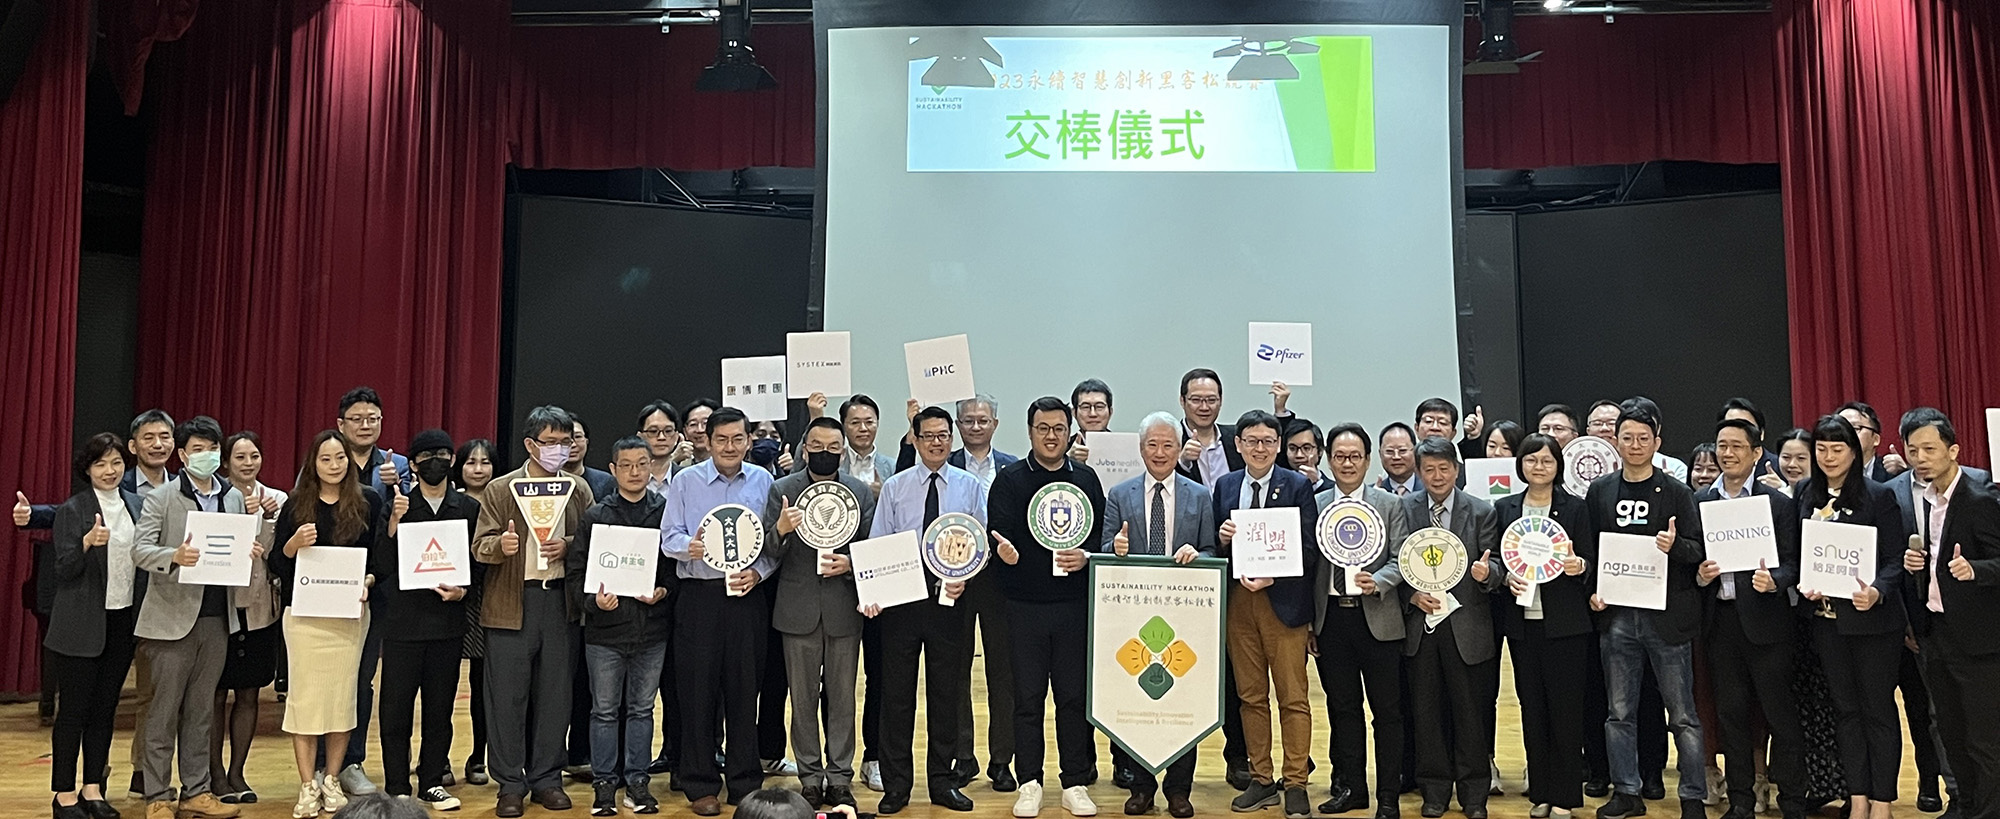 Representatives from the eight universities in central Taiwan and 16 enterprises participating in the '2023 Sustainability Hackathon